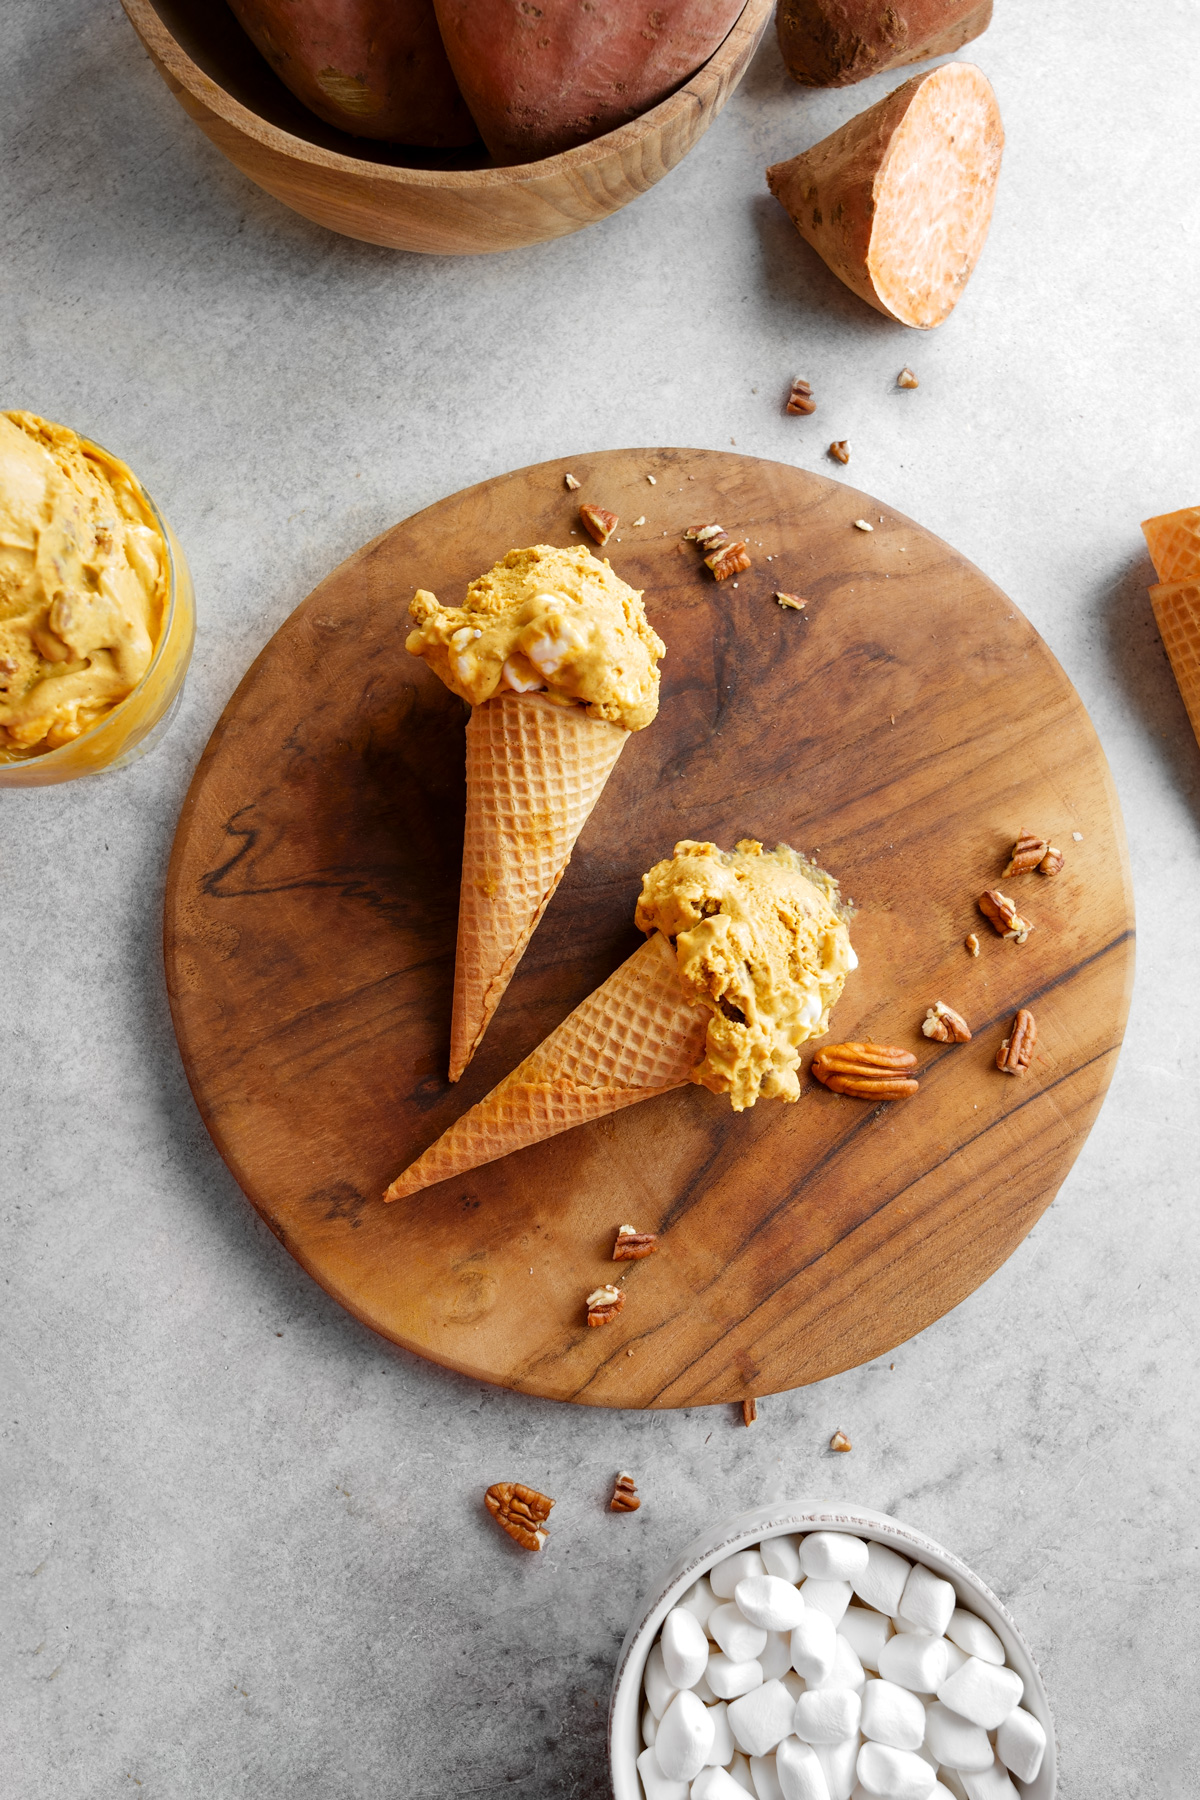 the sweet potato ice cream scooped into cones laying flat